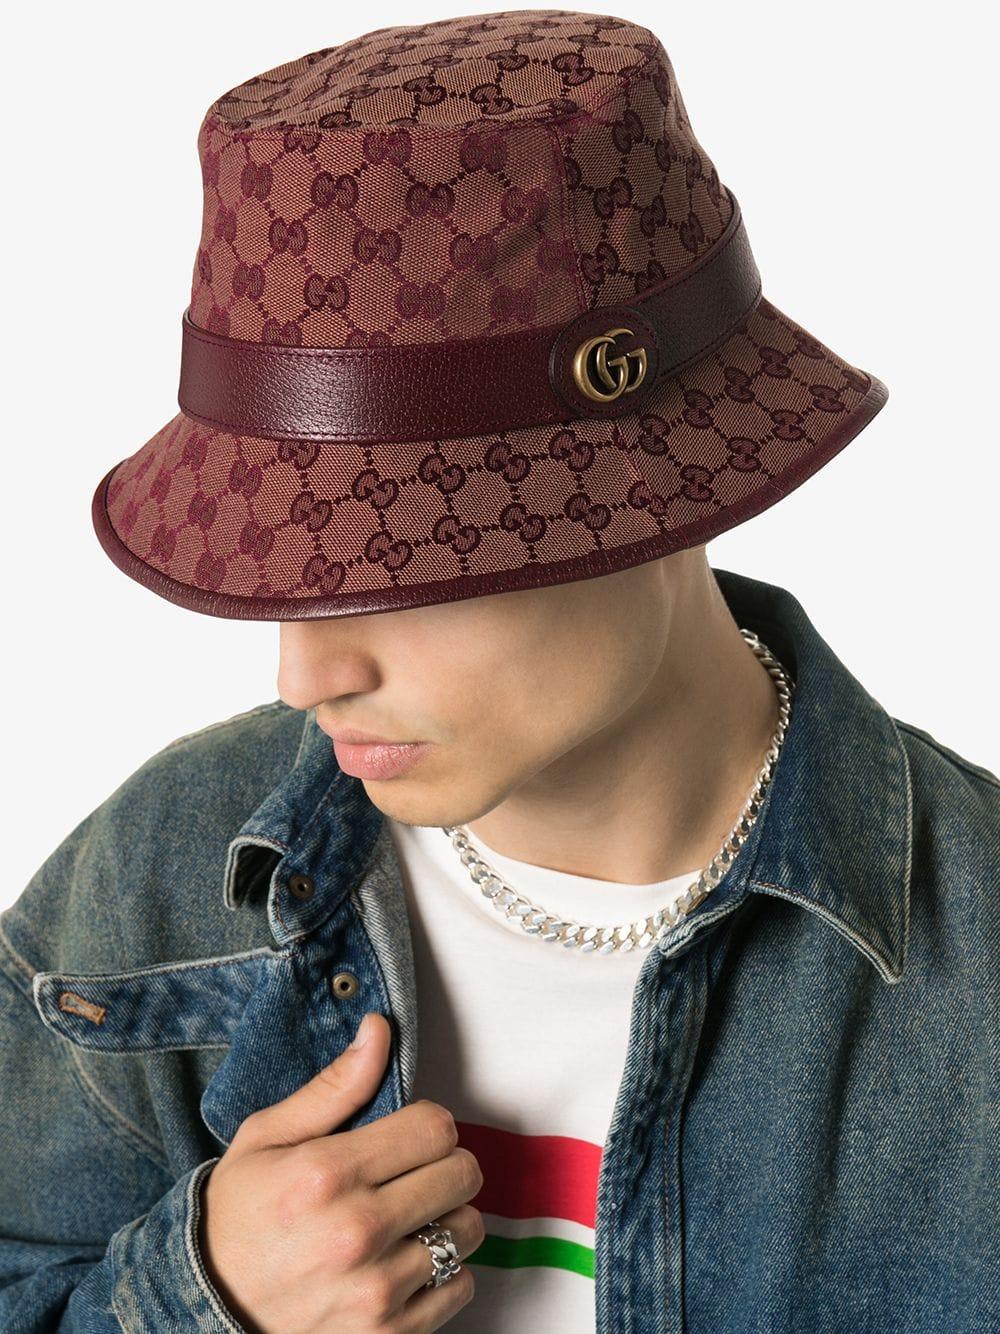 Gucci GG Canvas Fedora in Red for Men - Lyst